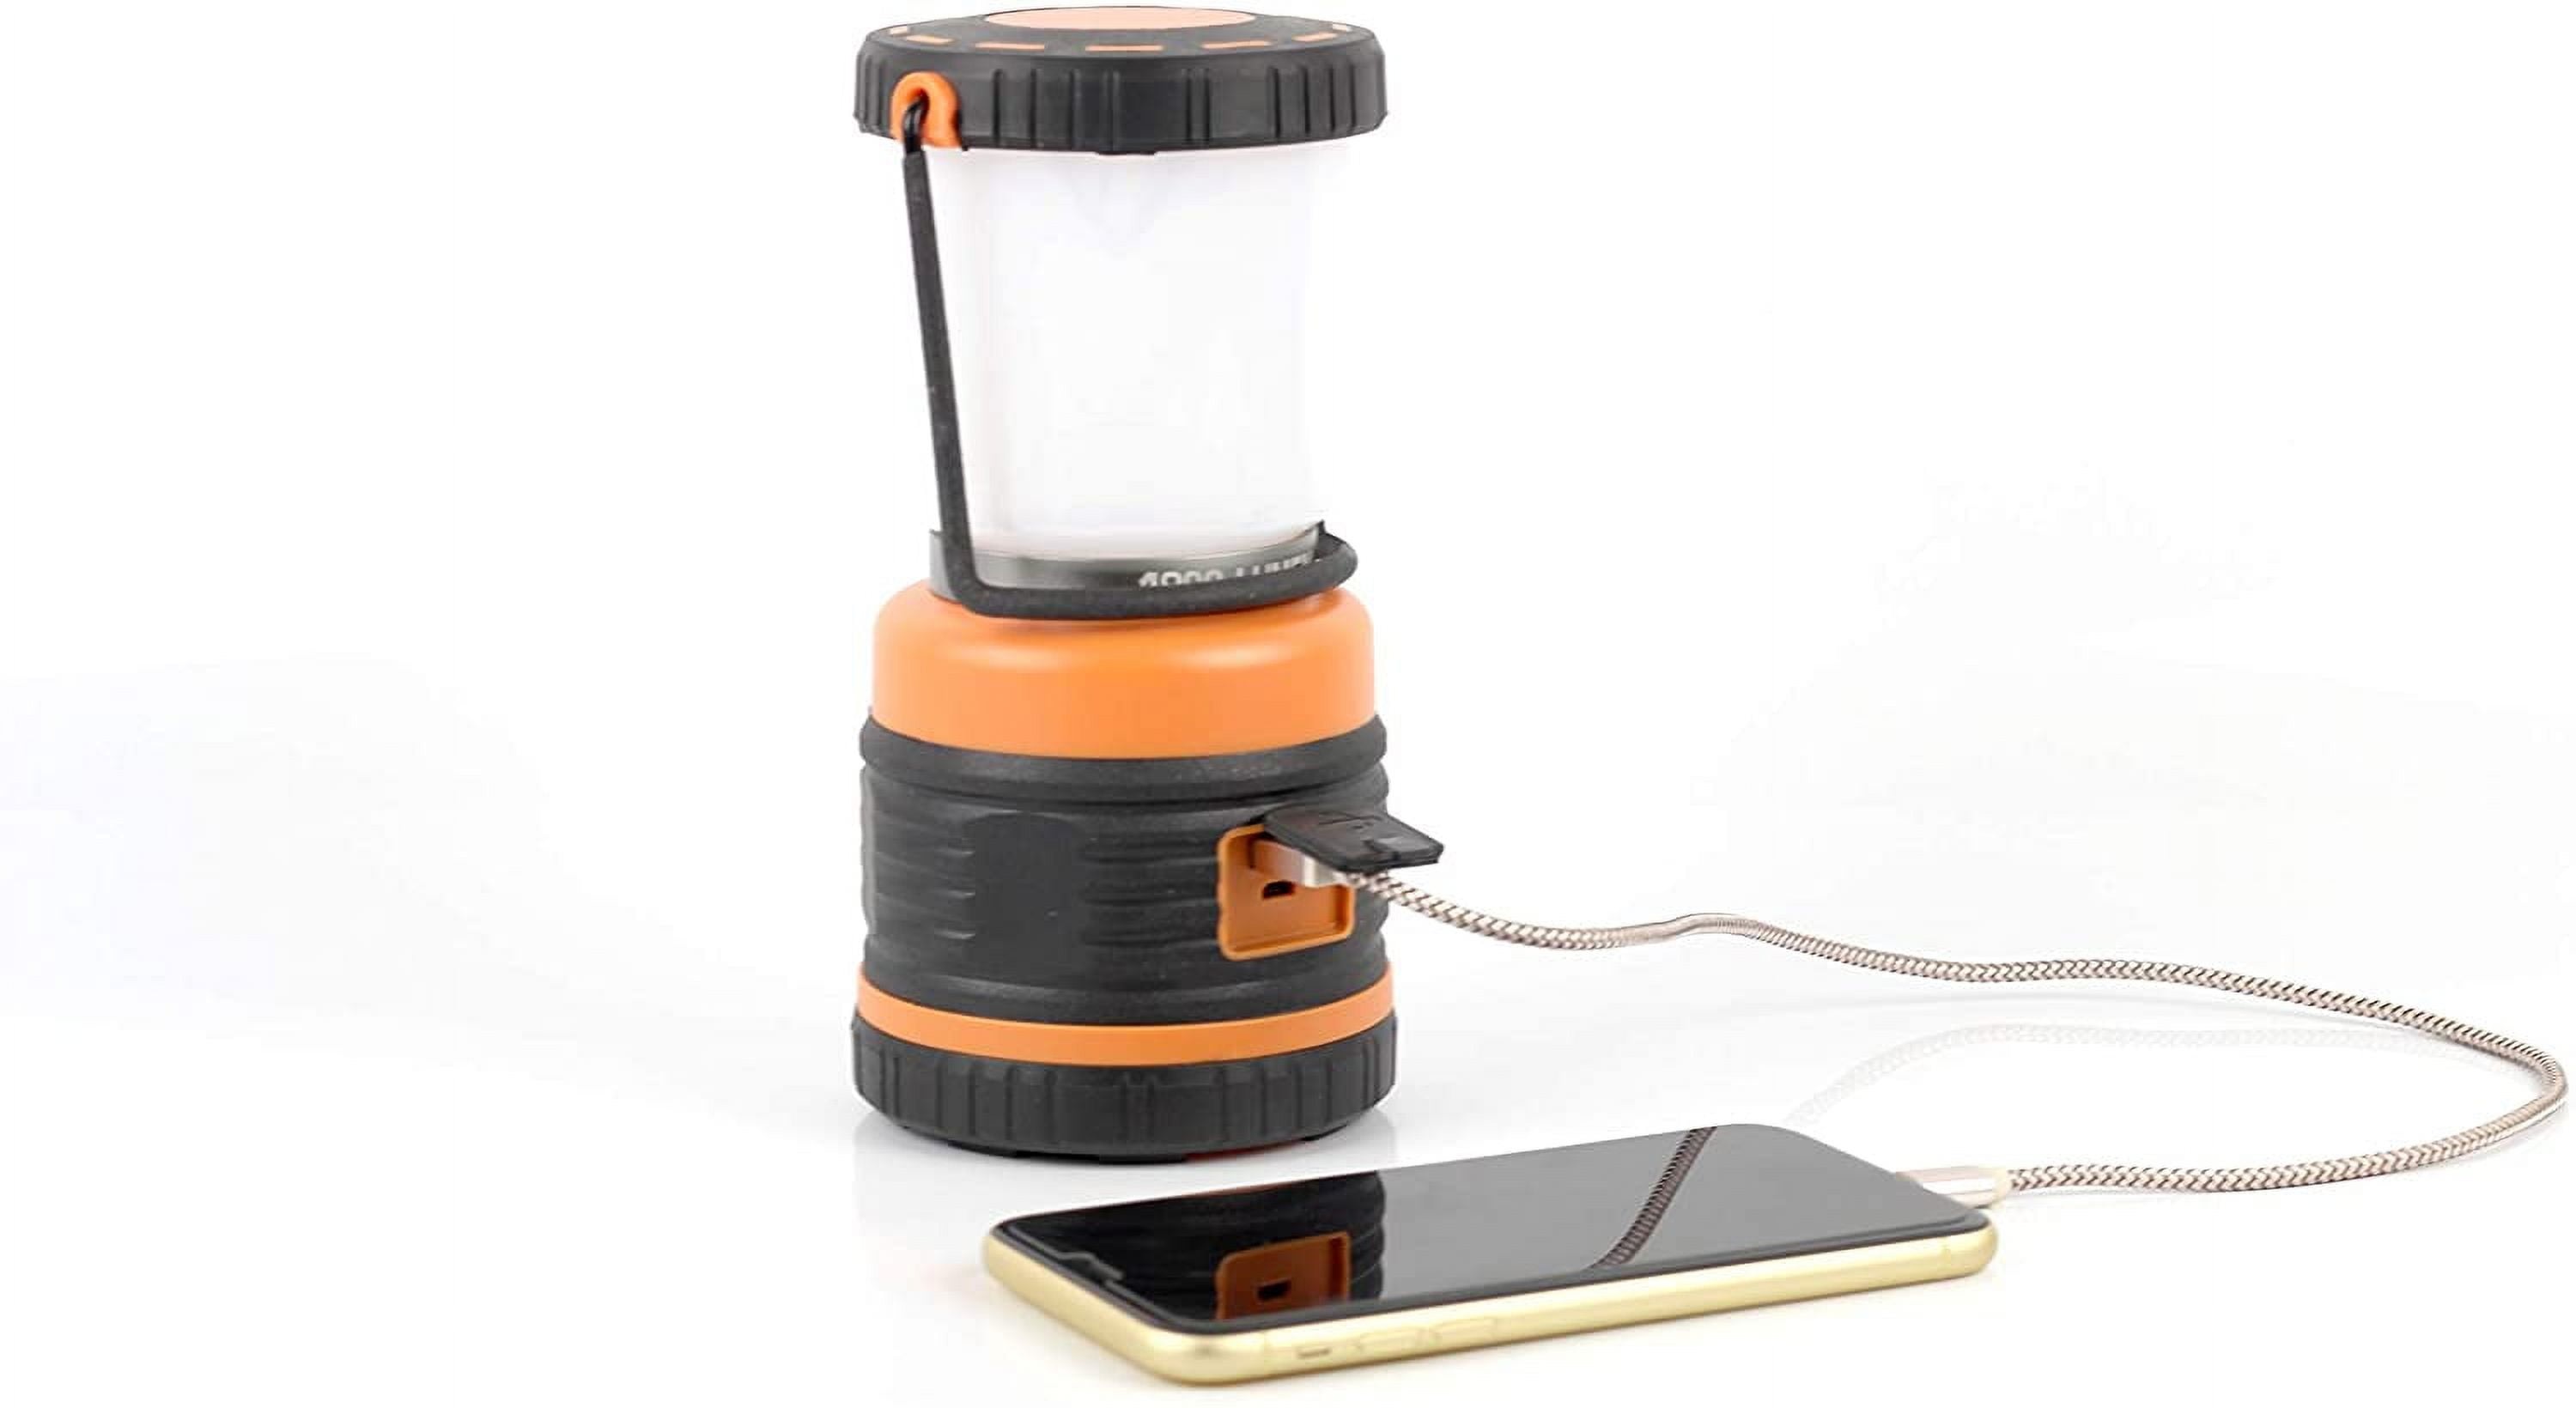 Portable Led Camping Lantern with Warm Light 2700K,Battery Operated Lights  with 1500mAh,Stepless Dimming,80LM,Rechargeable Flashlight for Short